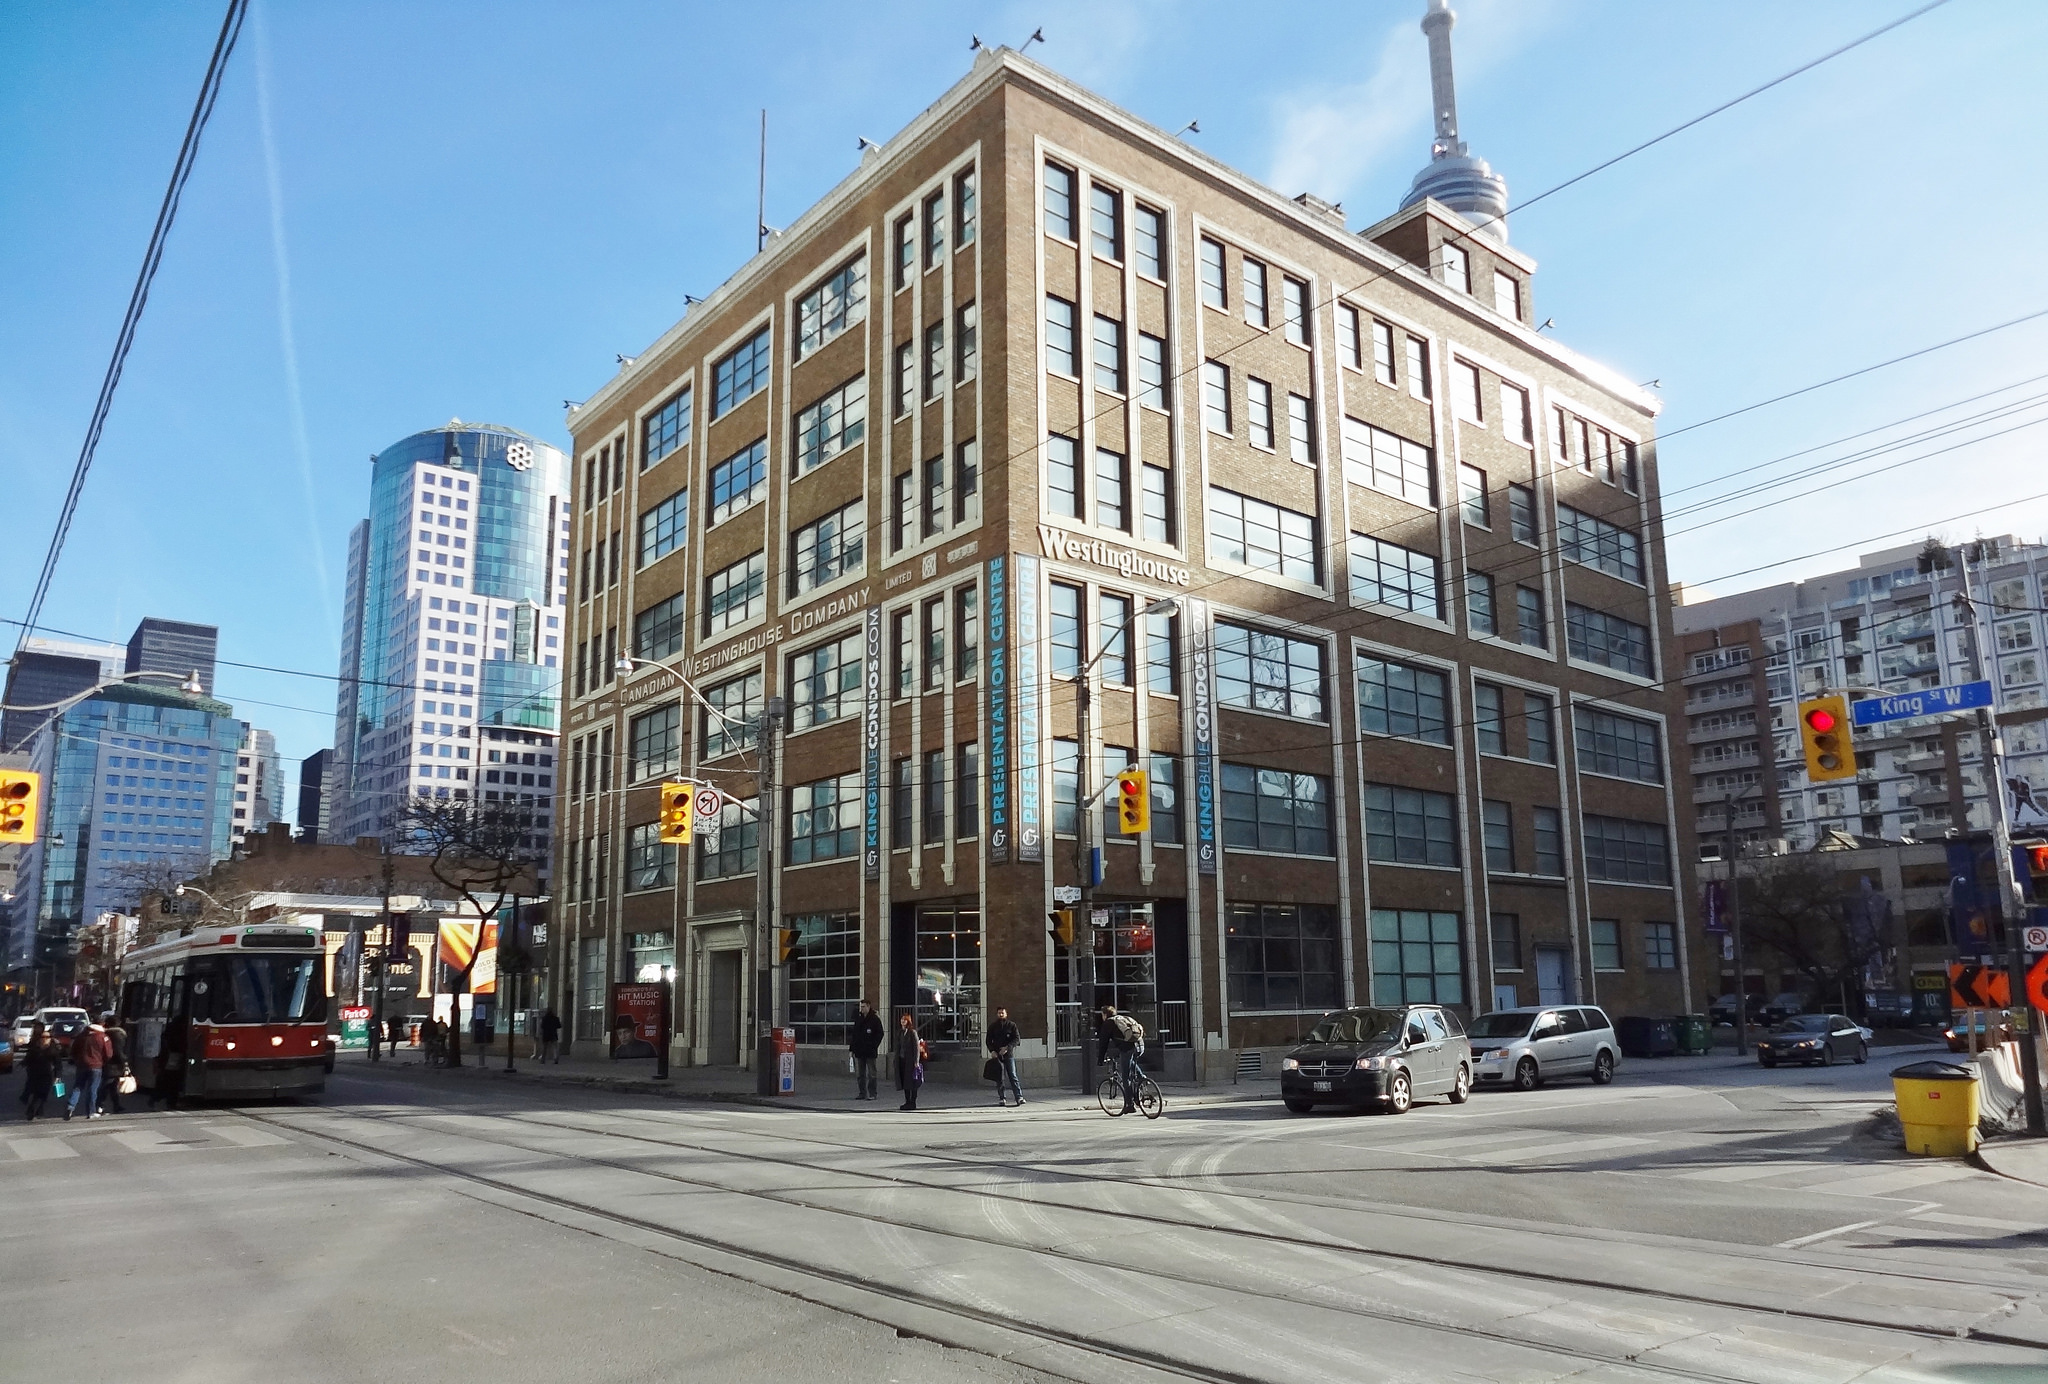 Historic Westinghouse Building in King West.